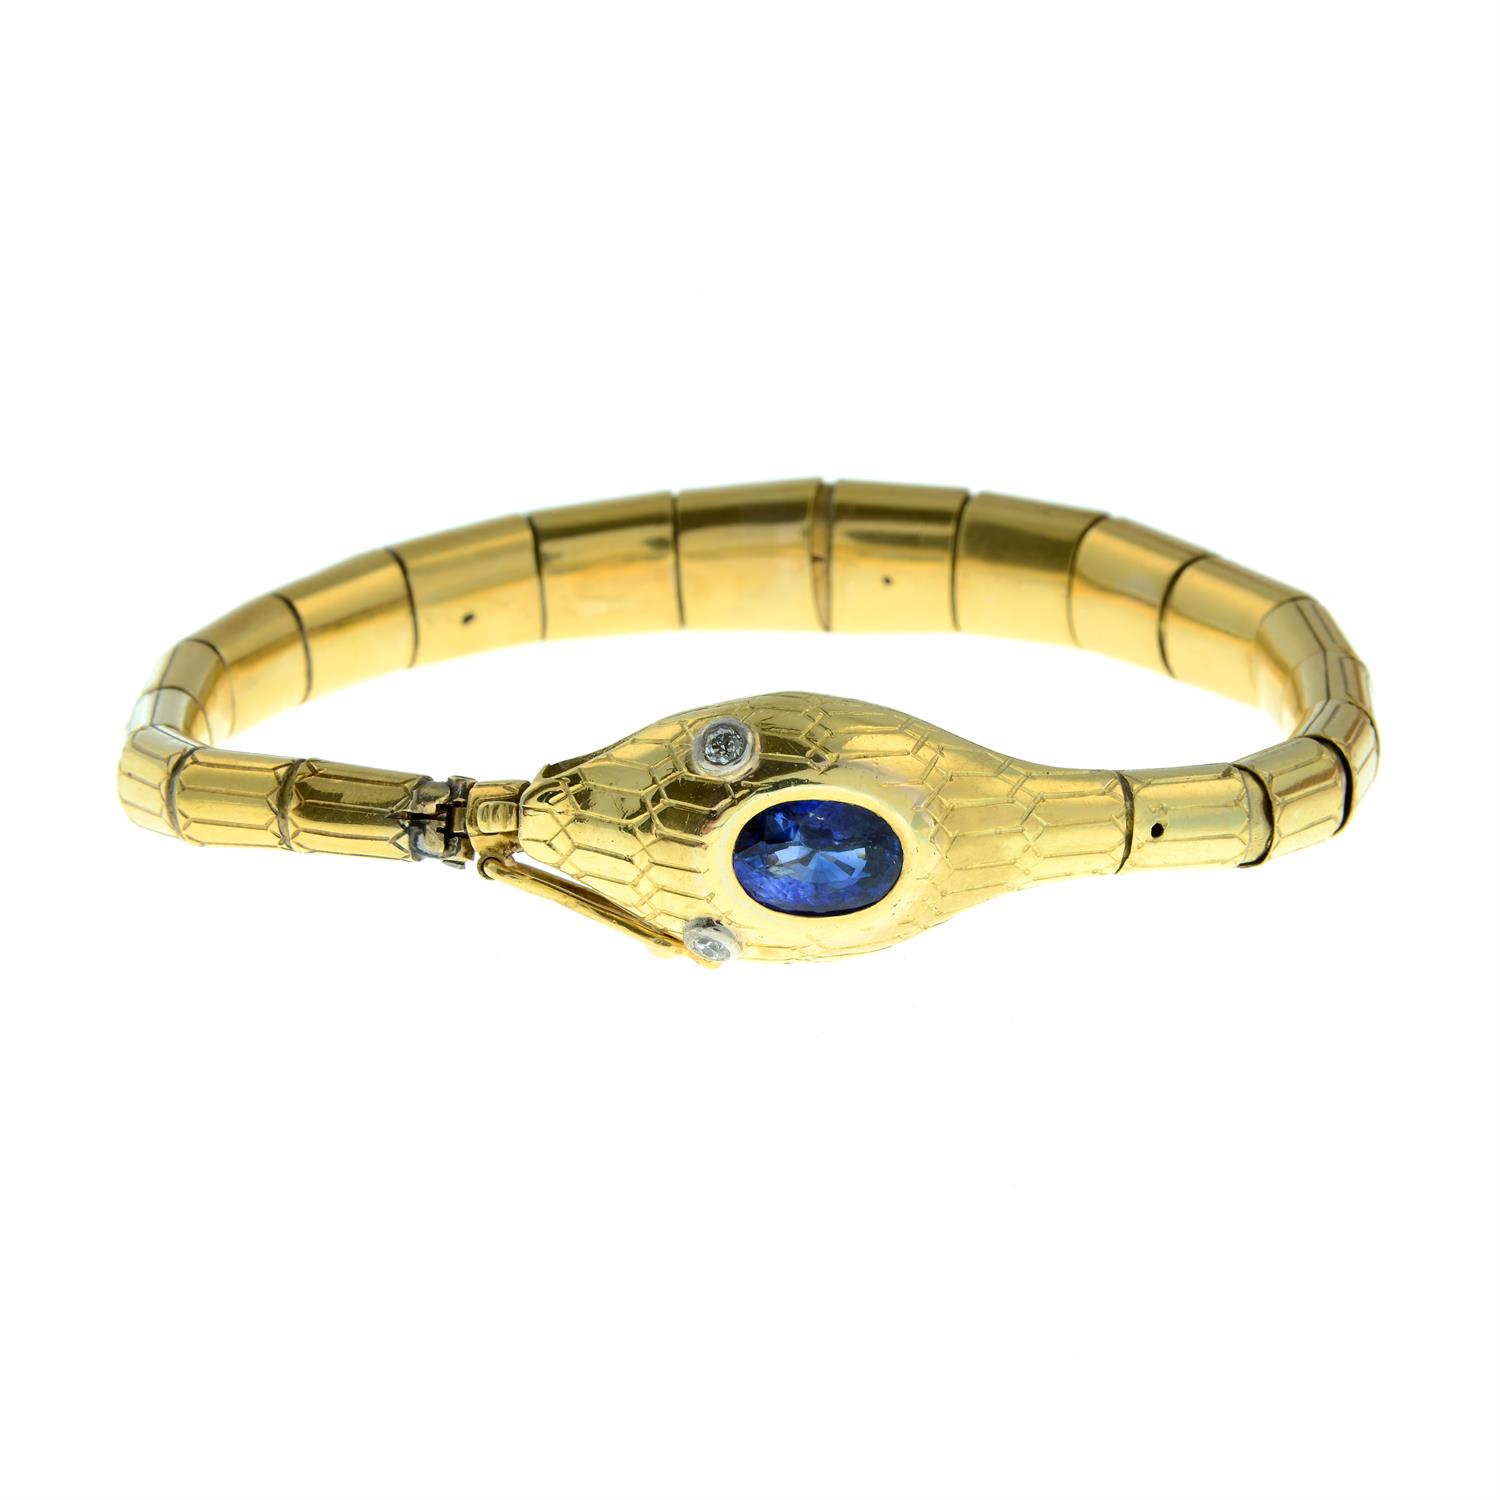 A 19th century gold snake bracelet, with sapphire crest and old-cut diamond eyes. - Image 2 of 4